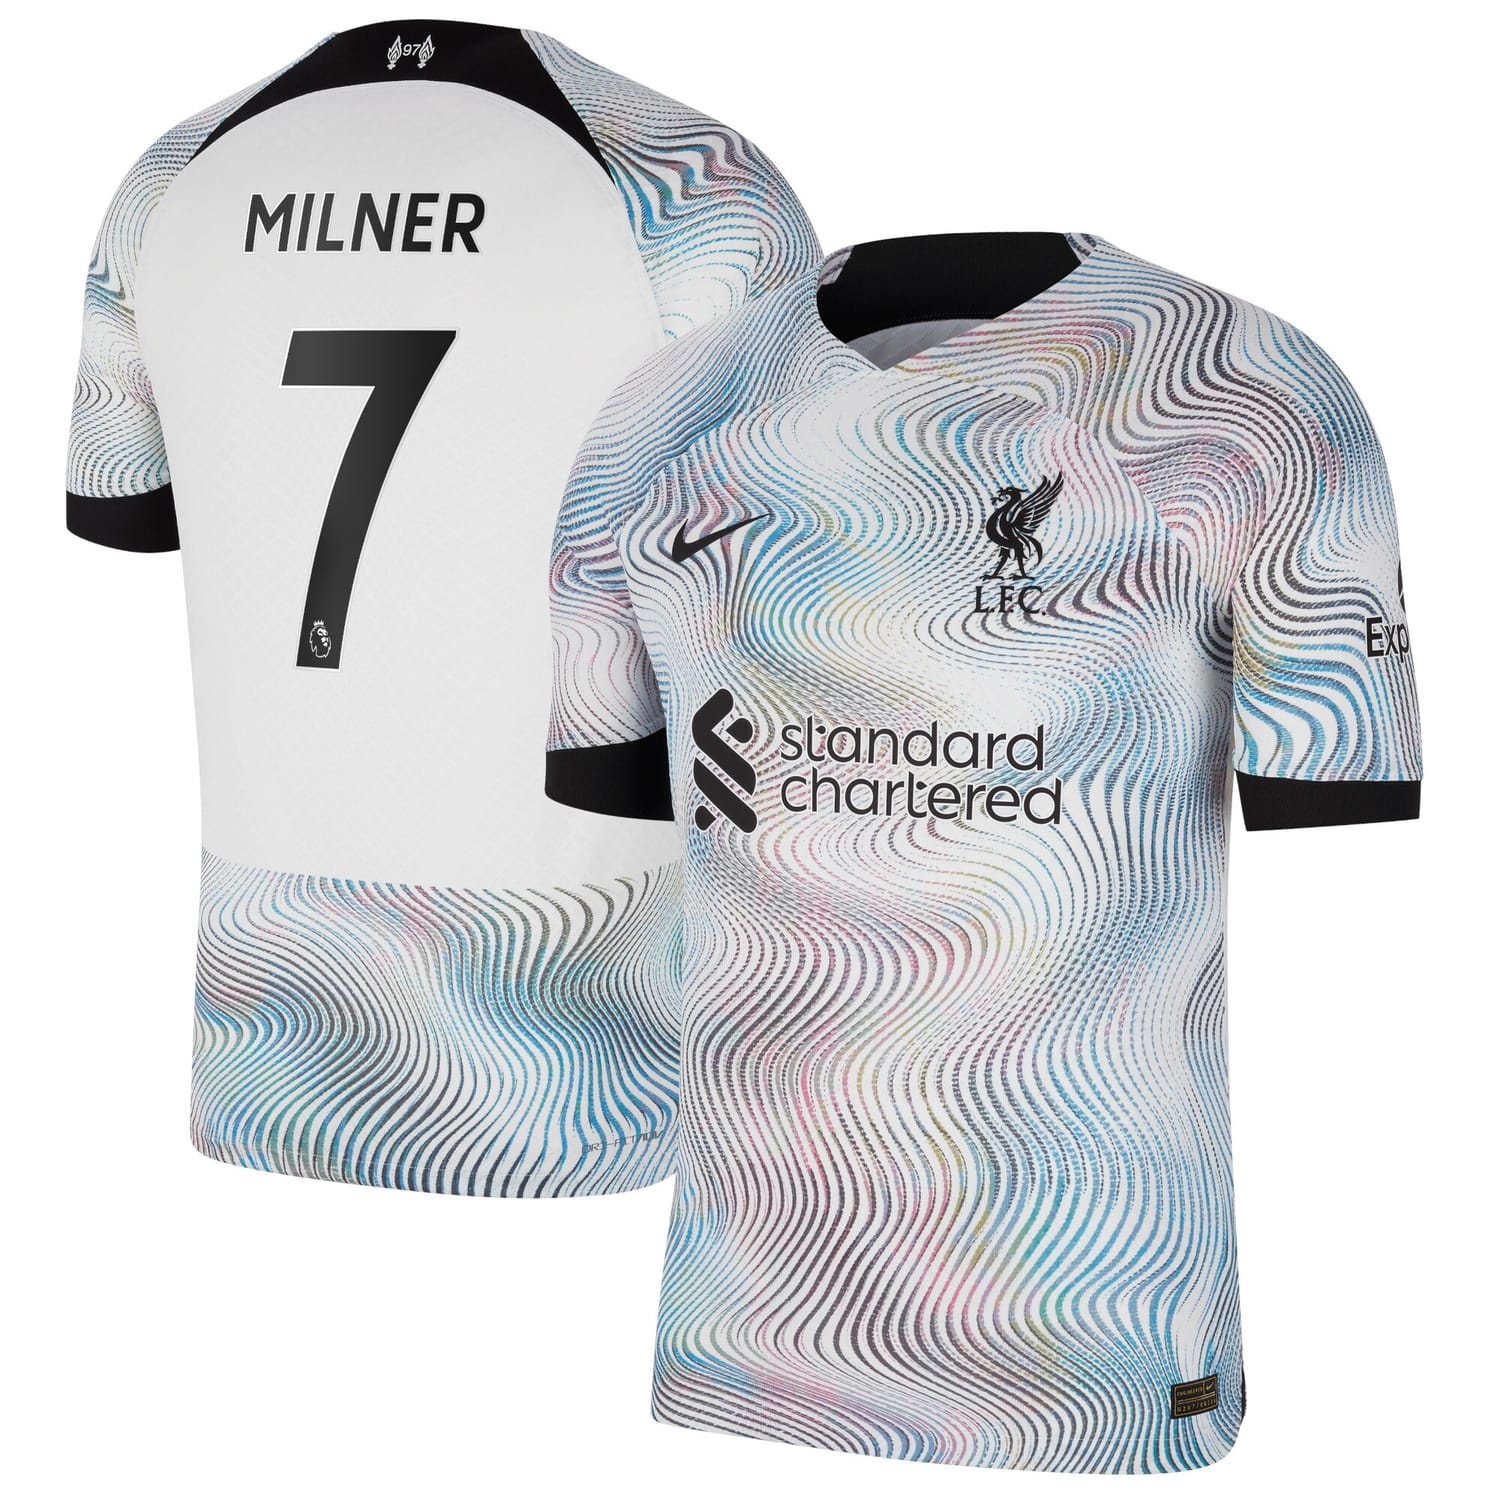 Premier League Liverpool Away Authentic Jersey Shirt 2022-23 player Milner 7 printing for Men